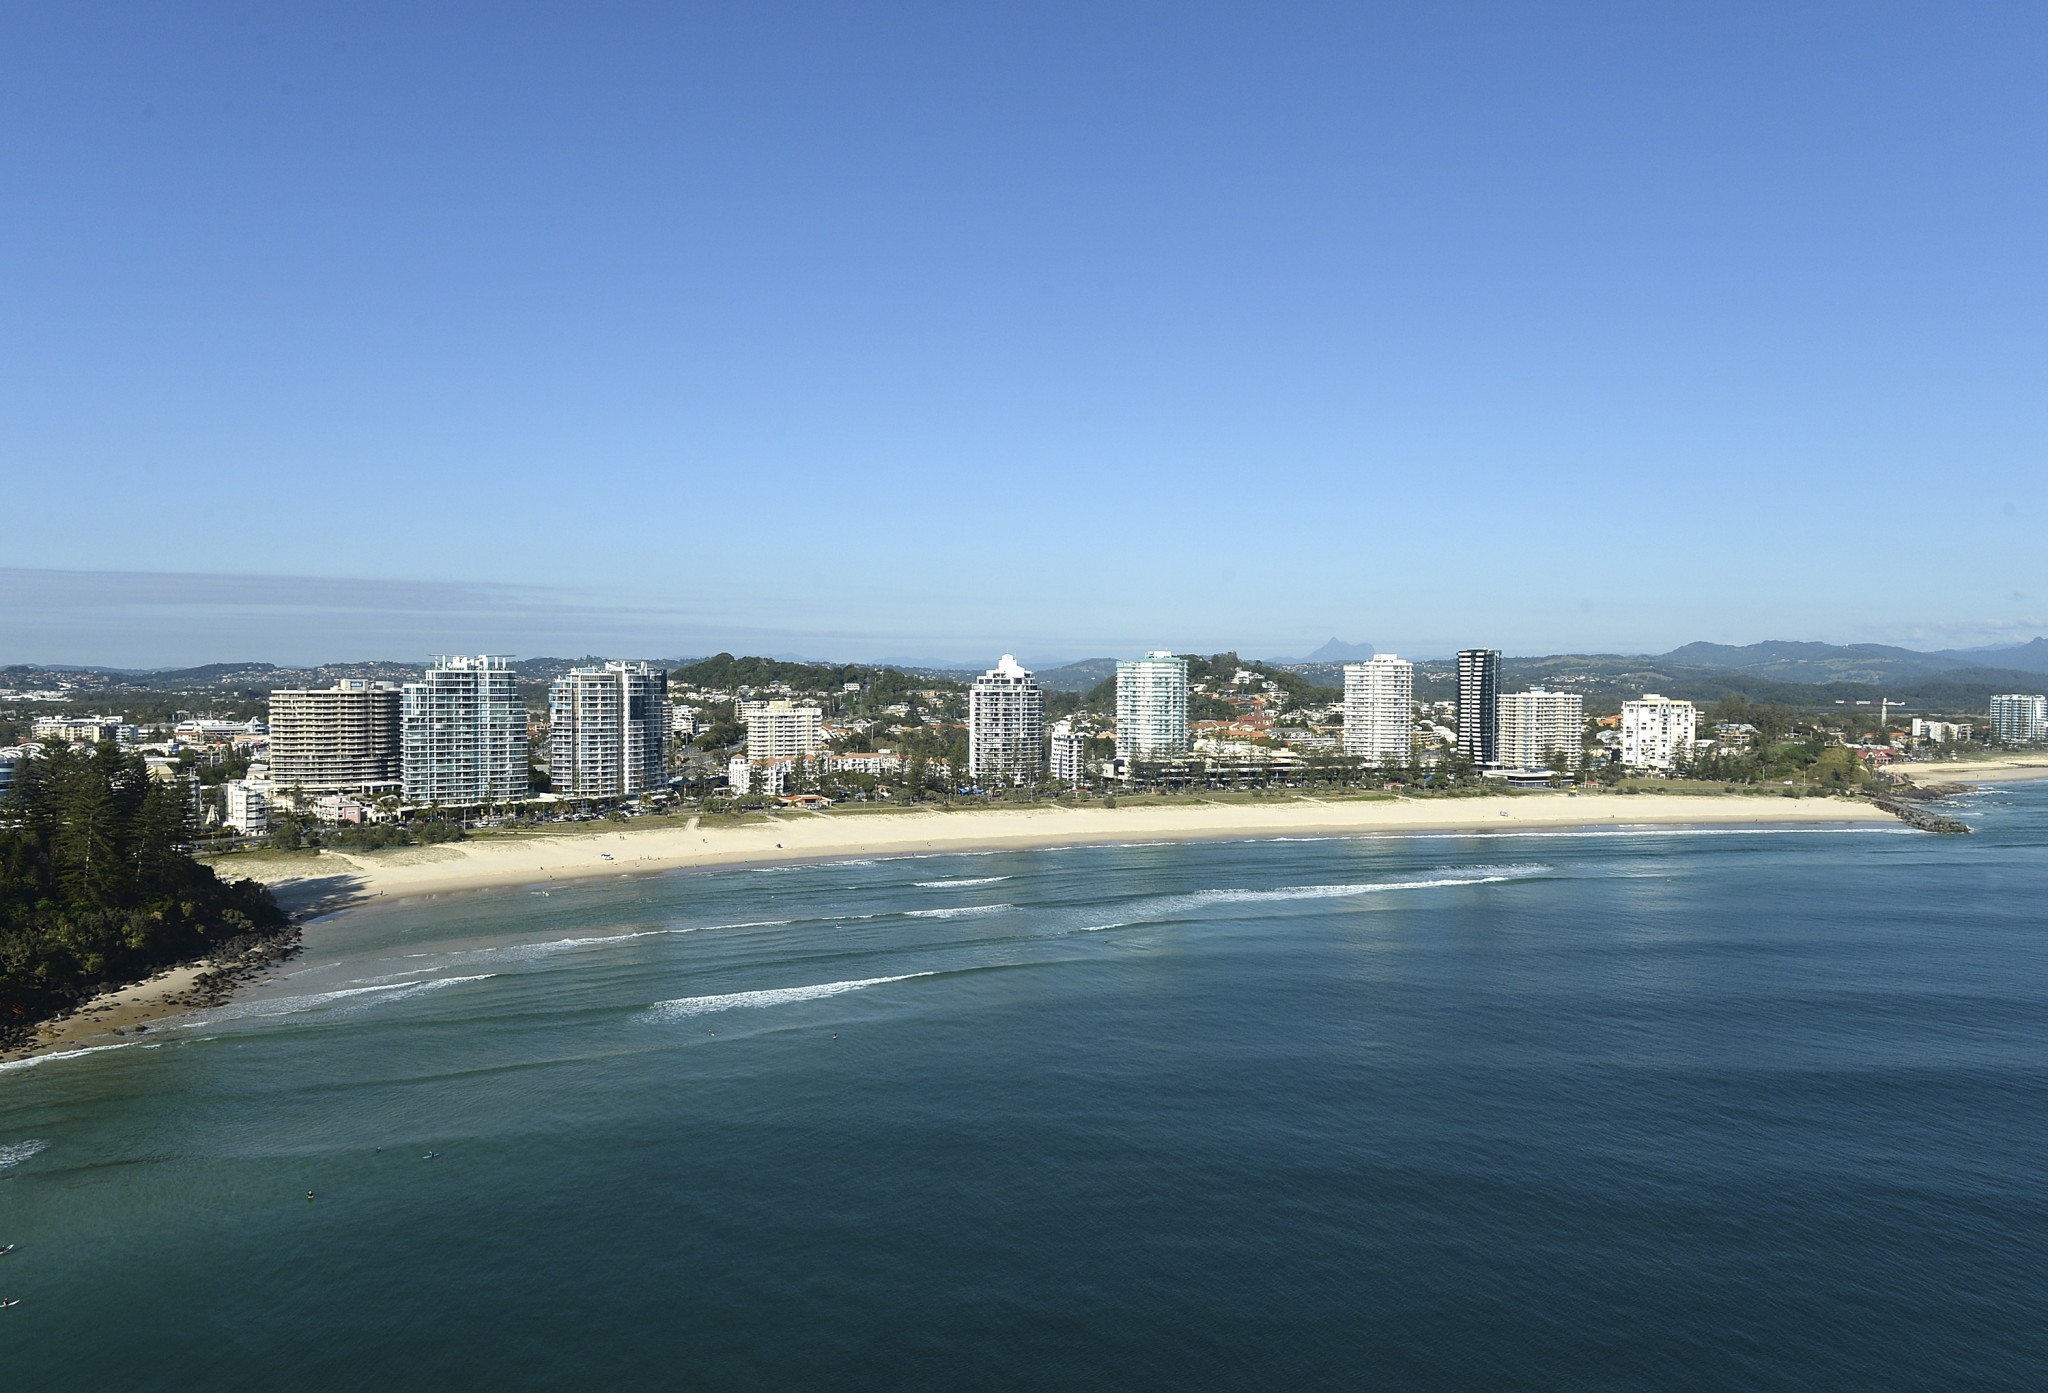 Gold Coast 2018 organisers to import sand from Brisbane for beach volleyball competition